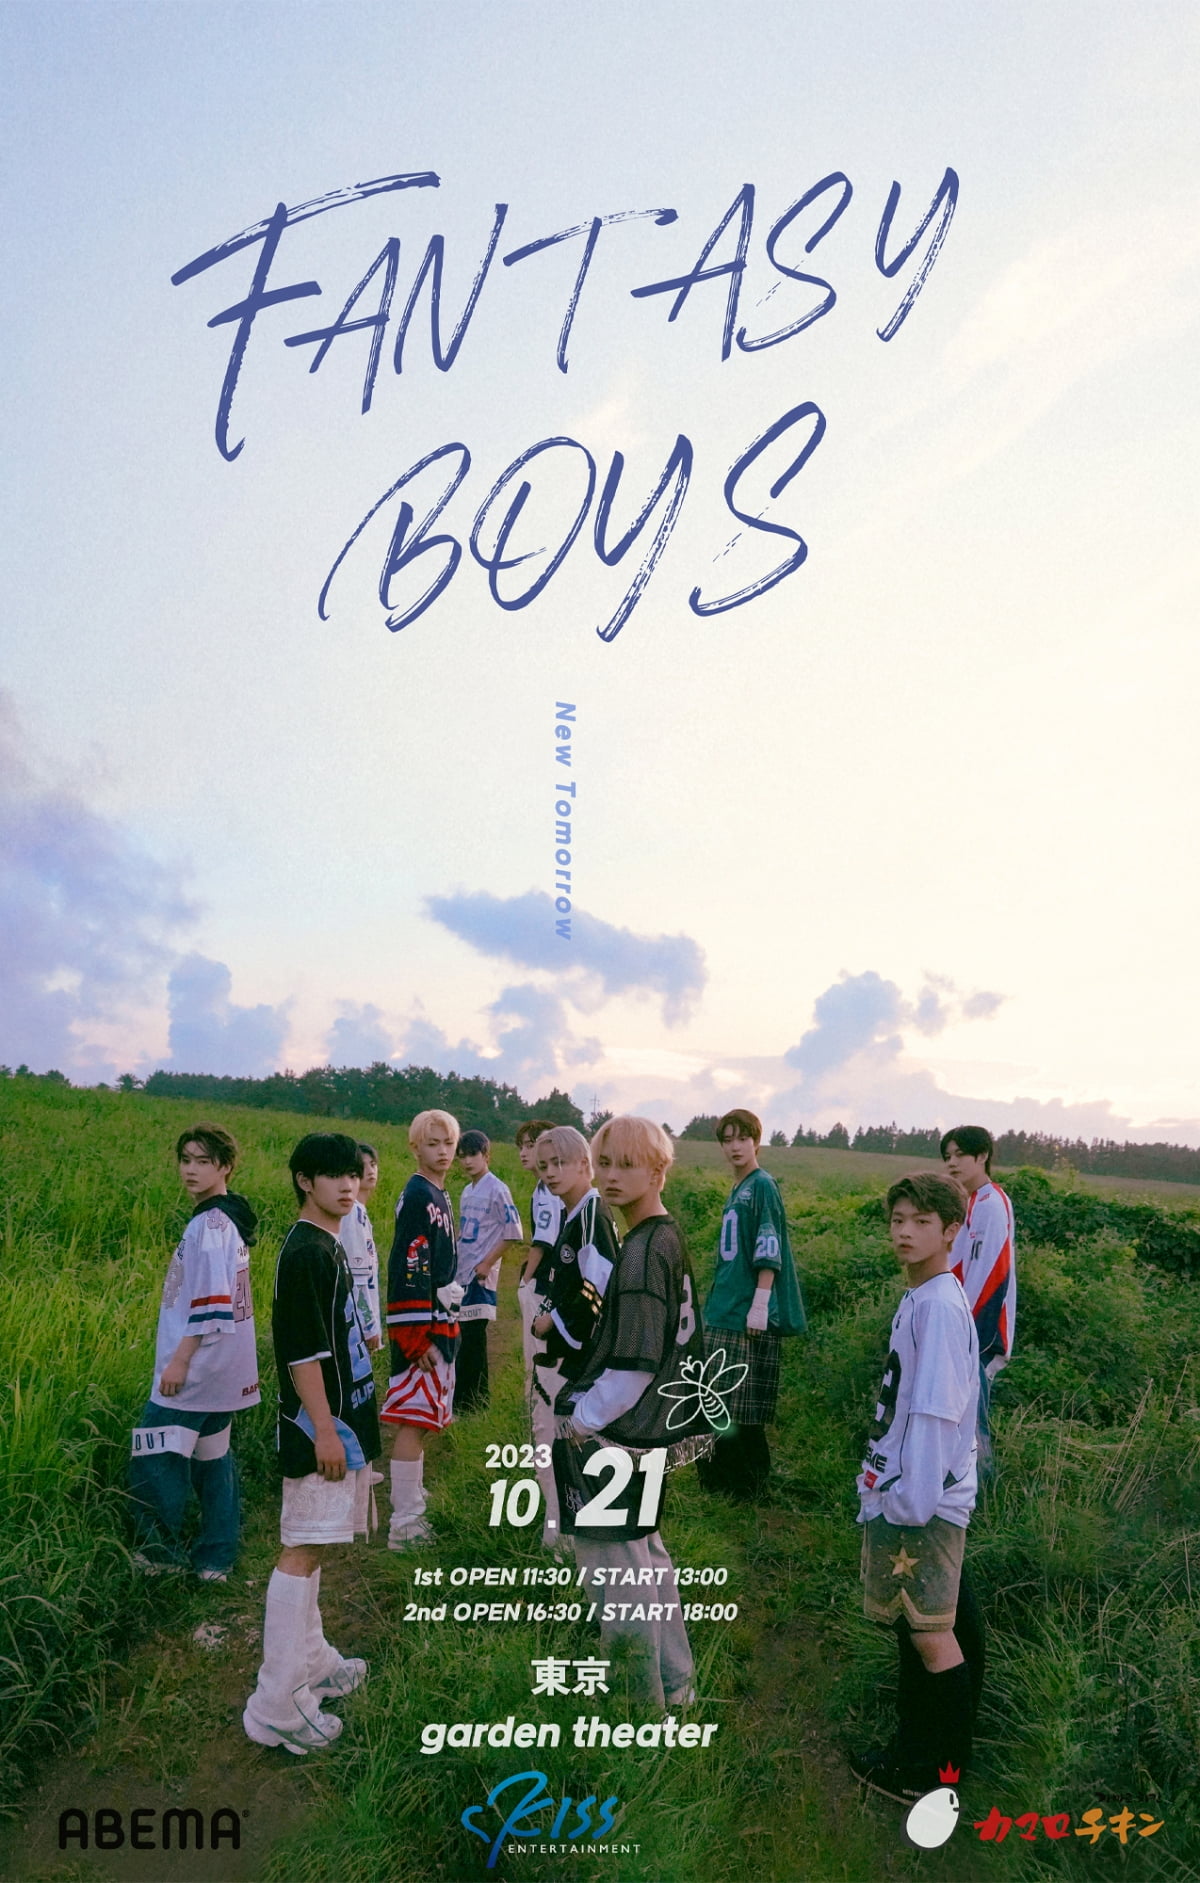 FANTASY BOYS, “Please look forward to the best movie-like MV of all time”